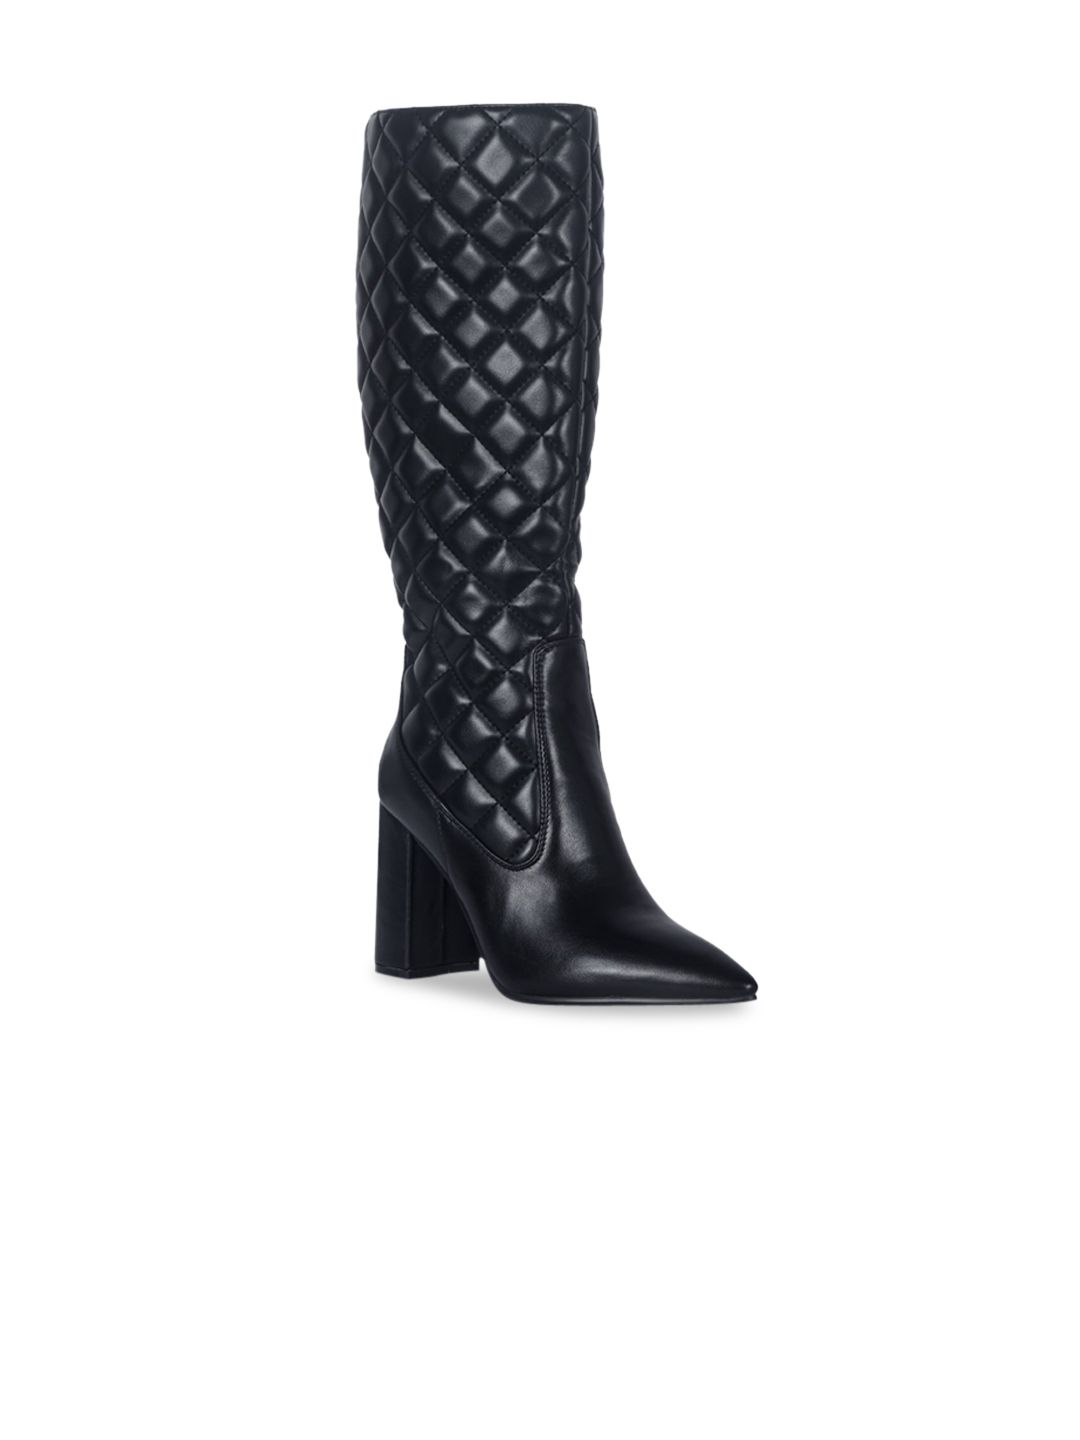 London Rag Black Party High-Top Block Heeled Boots Price in India